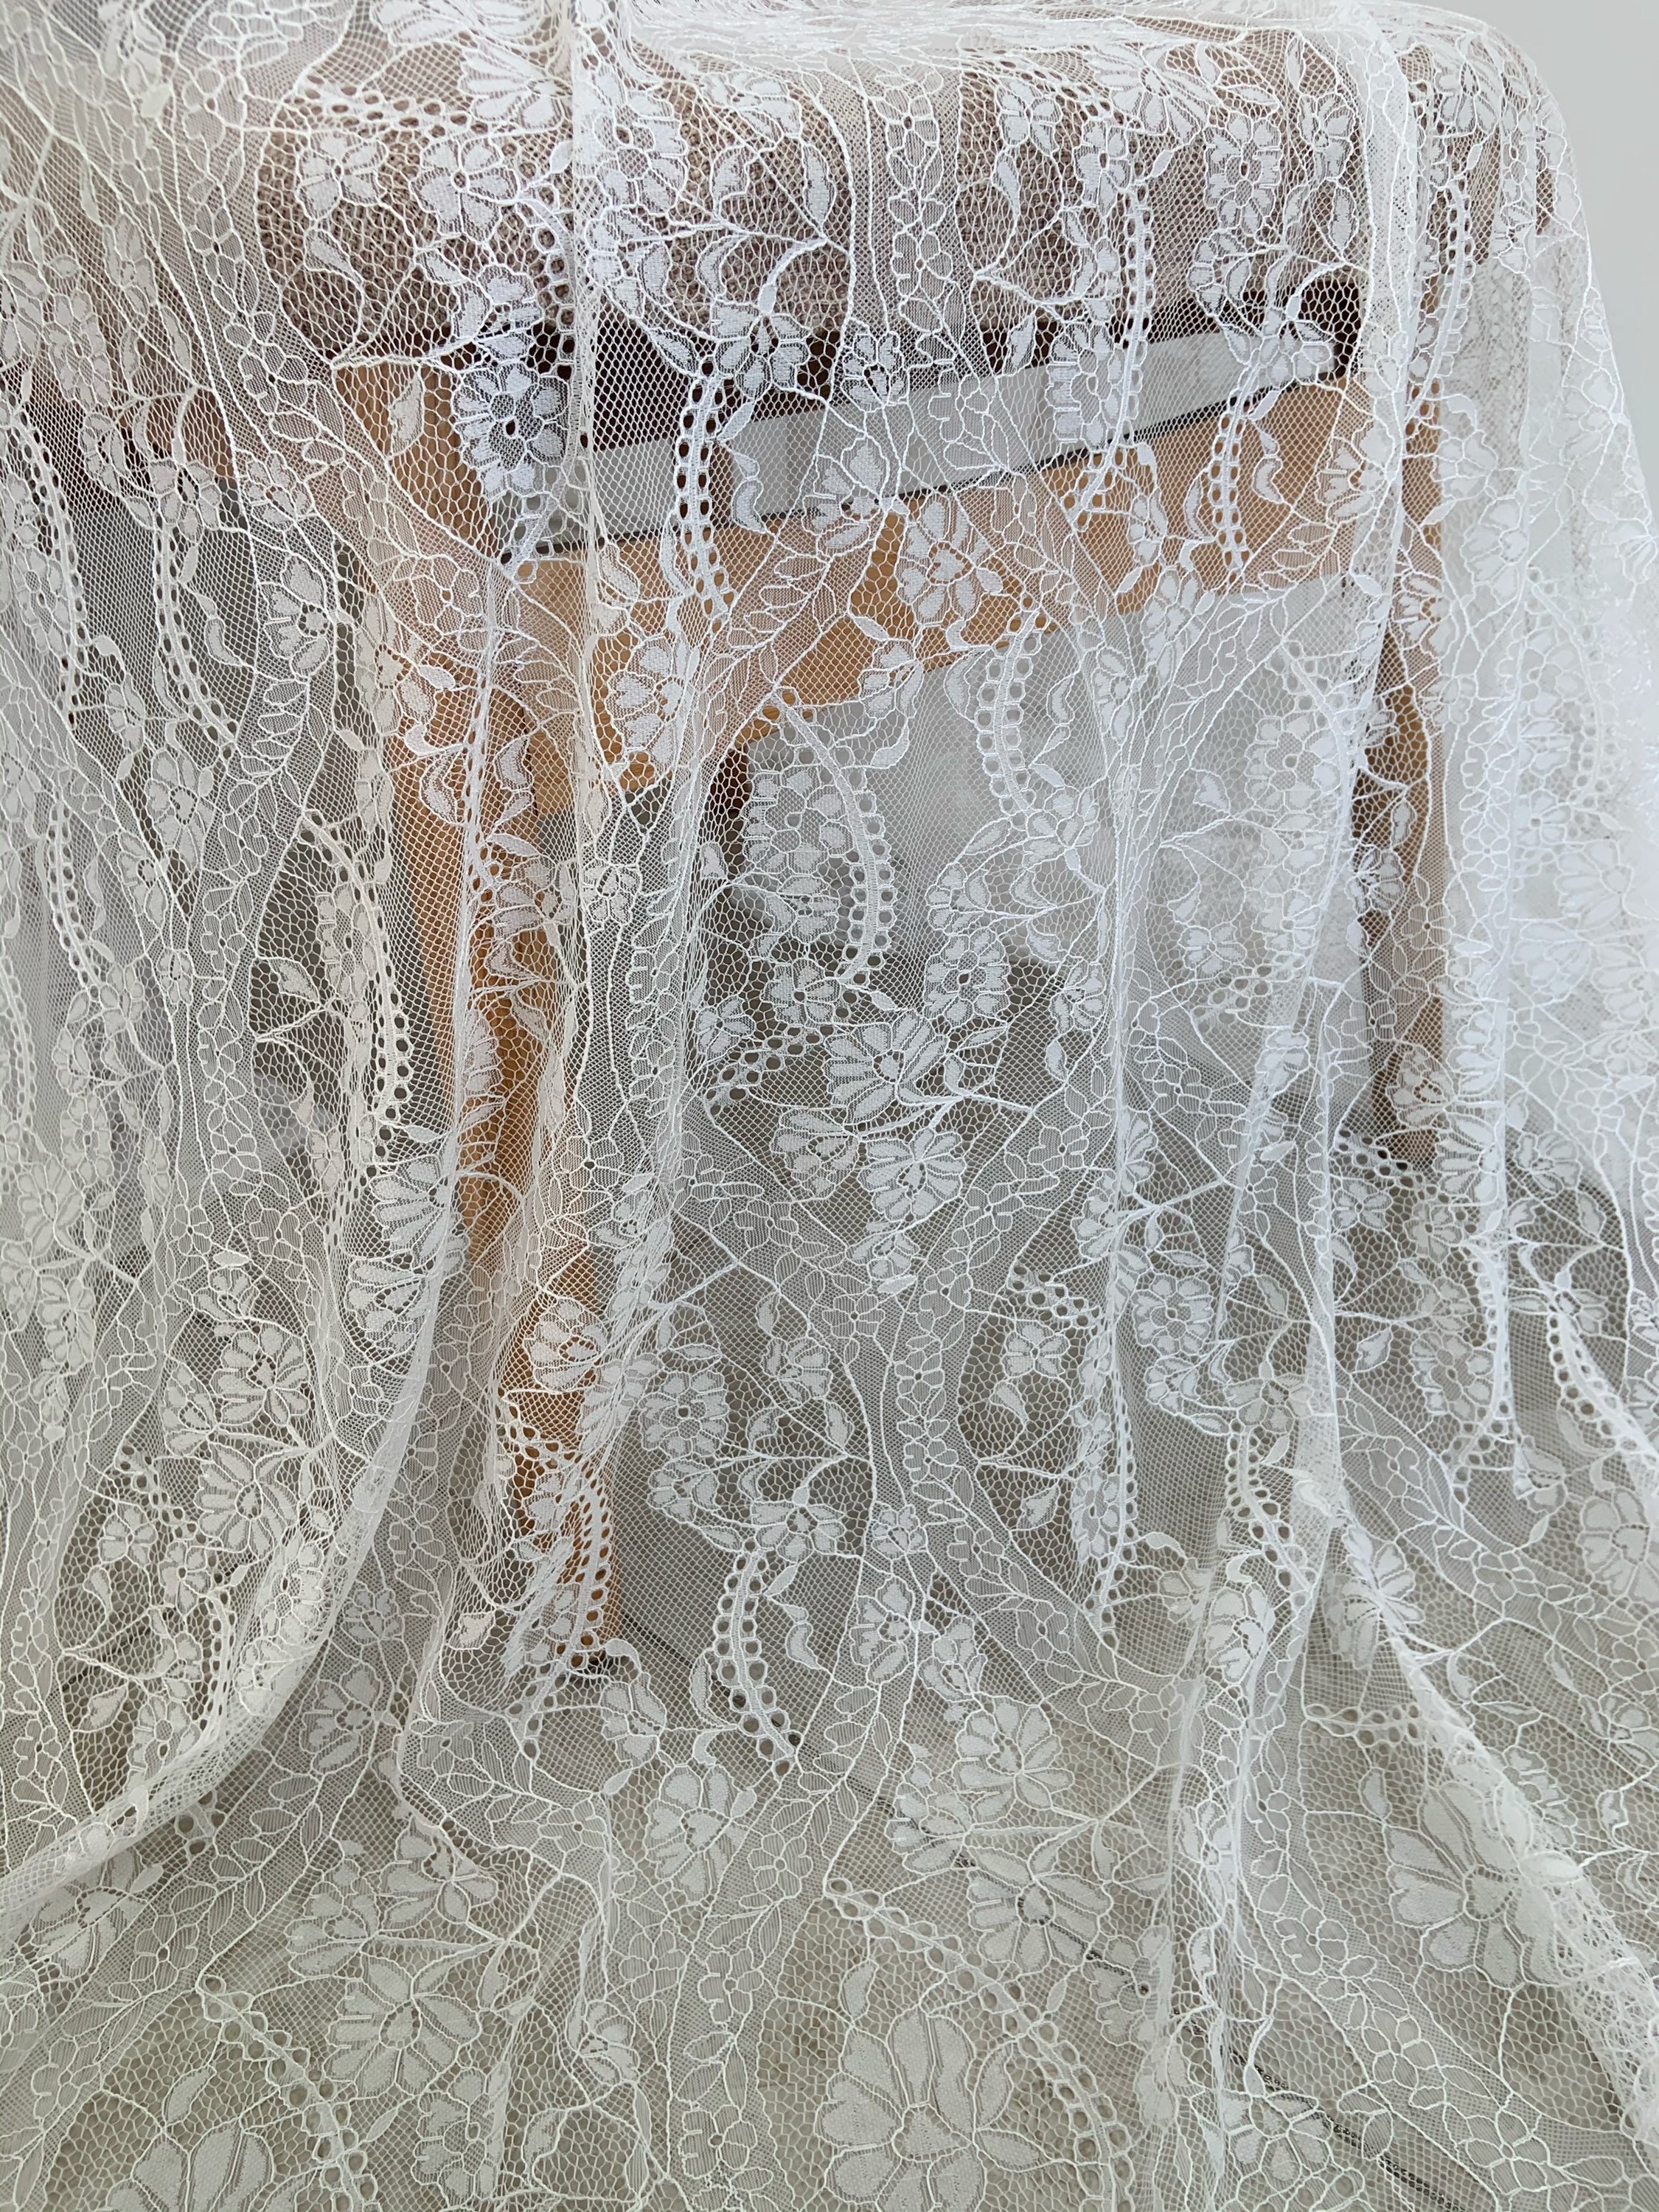 3 Meters Chantilly Lace Fabric With Chevron Florals - Etsy